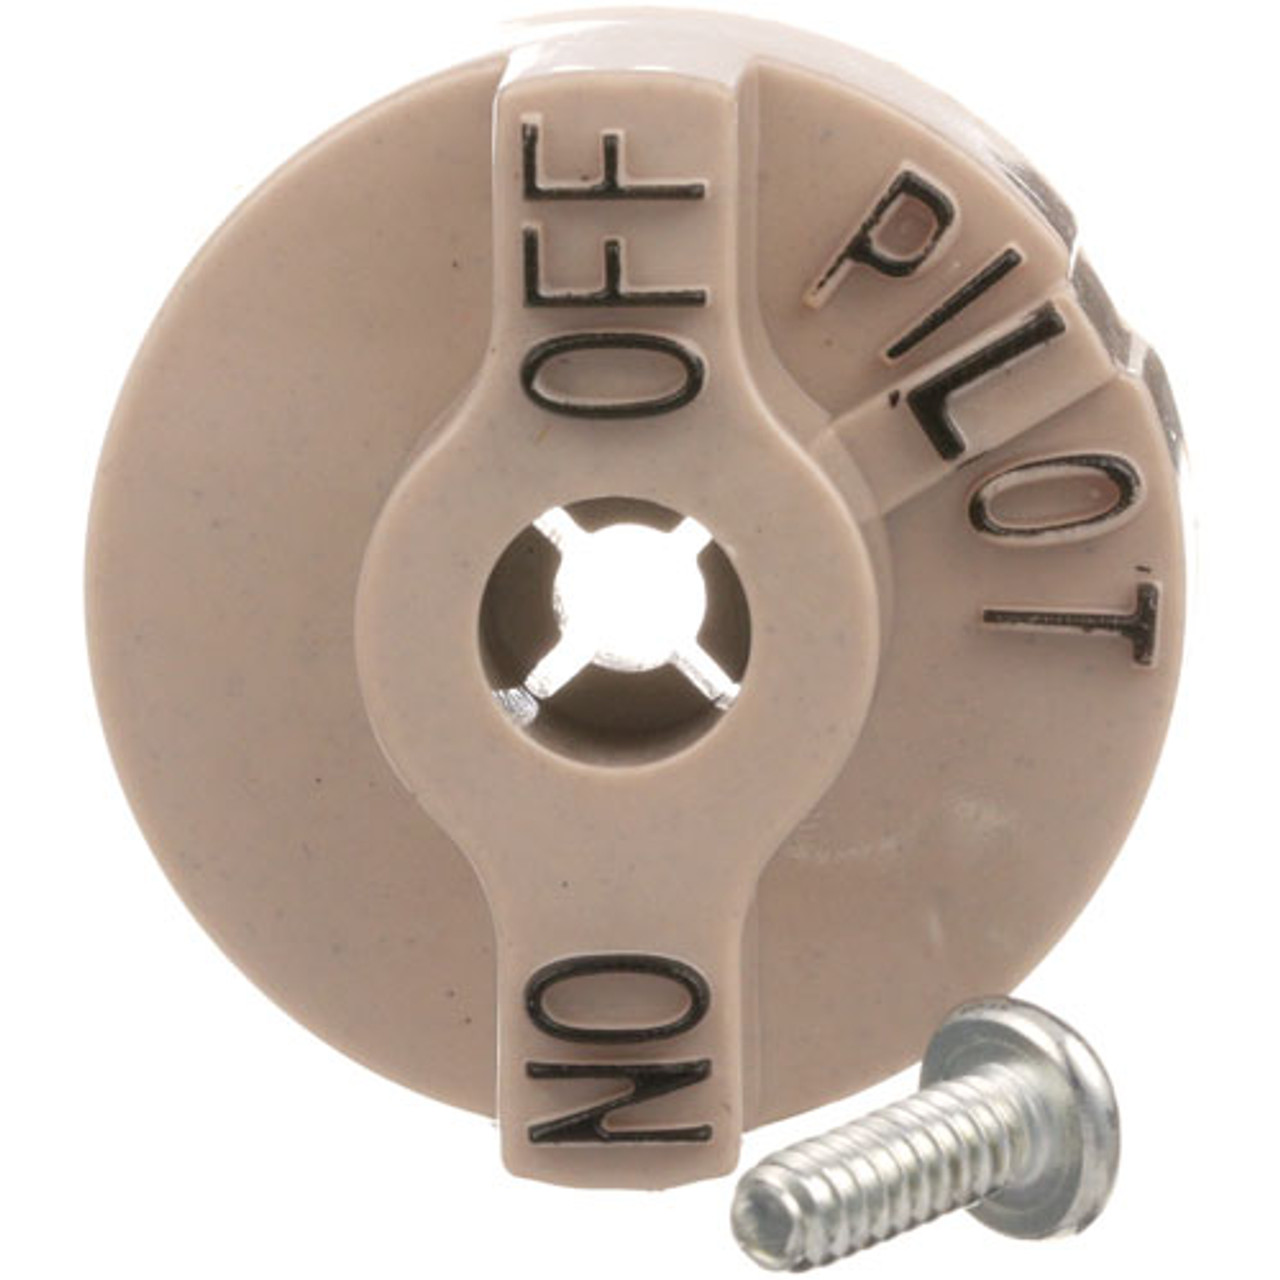 Valve Knob 1-1/4 D, Off-Pilot-On - Replacement Part For Imperial 28328